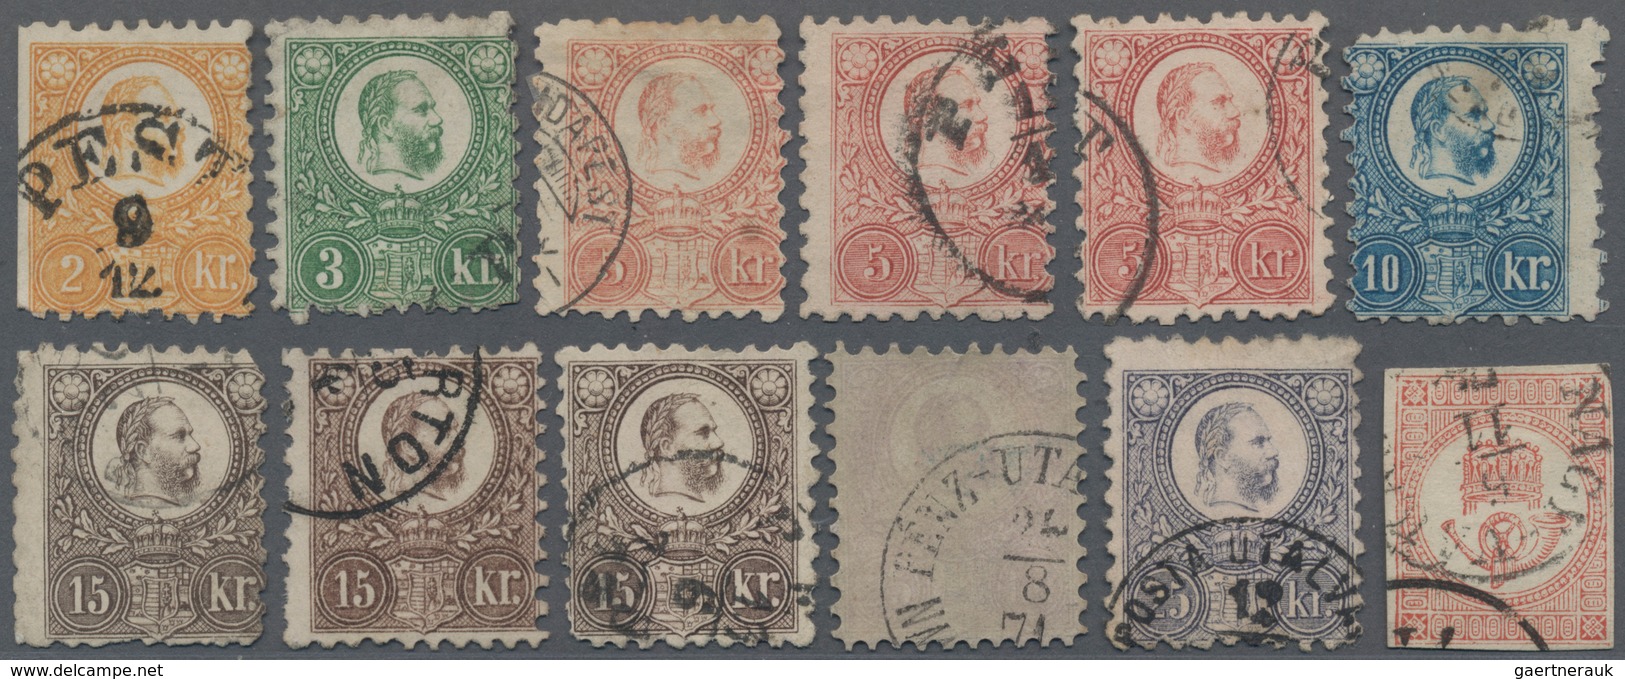 Ungarn: 1871-99 Ca.: Group Of 30 Used Stamps, With 12 Singles Of 1871 Franz Joseph Issues, One 1871 - Covers & Documents